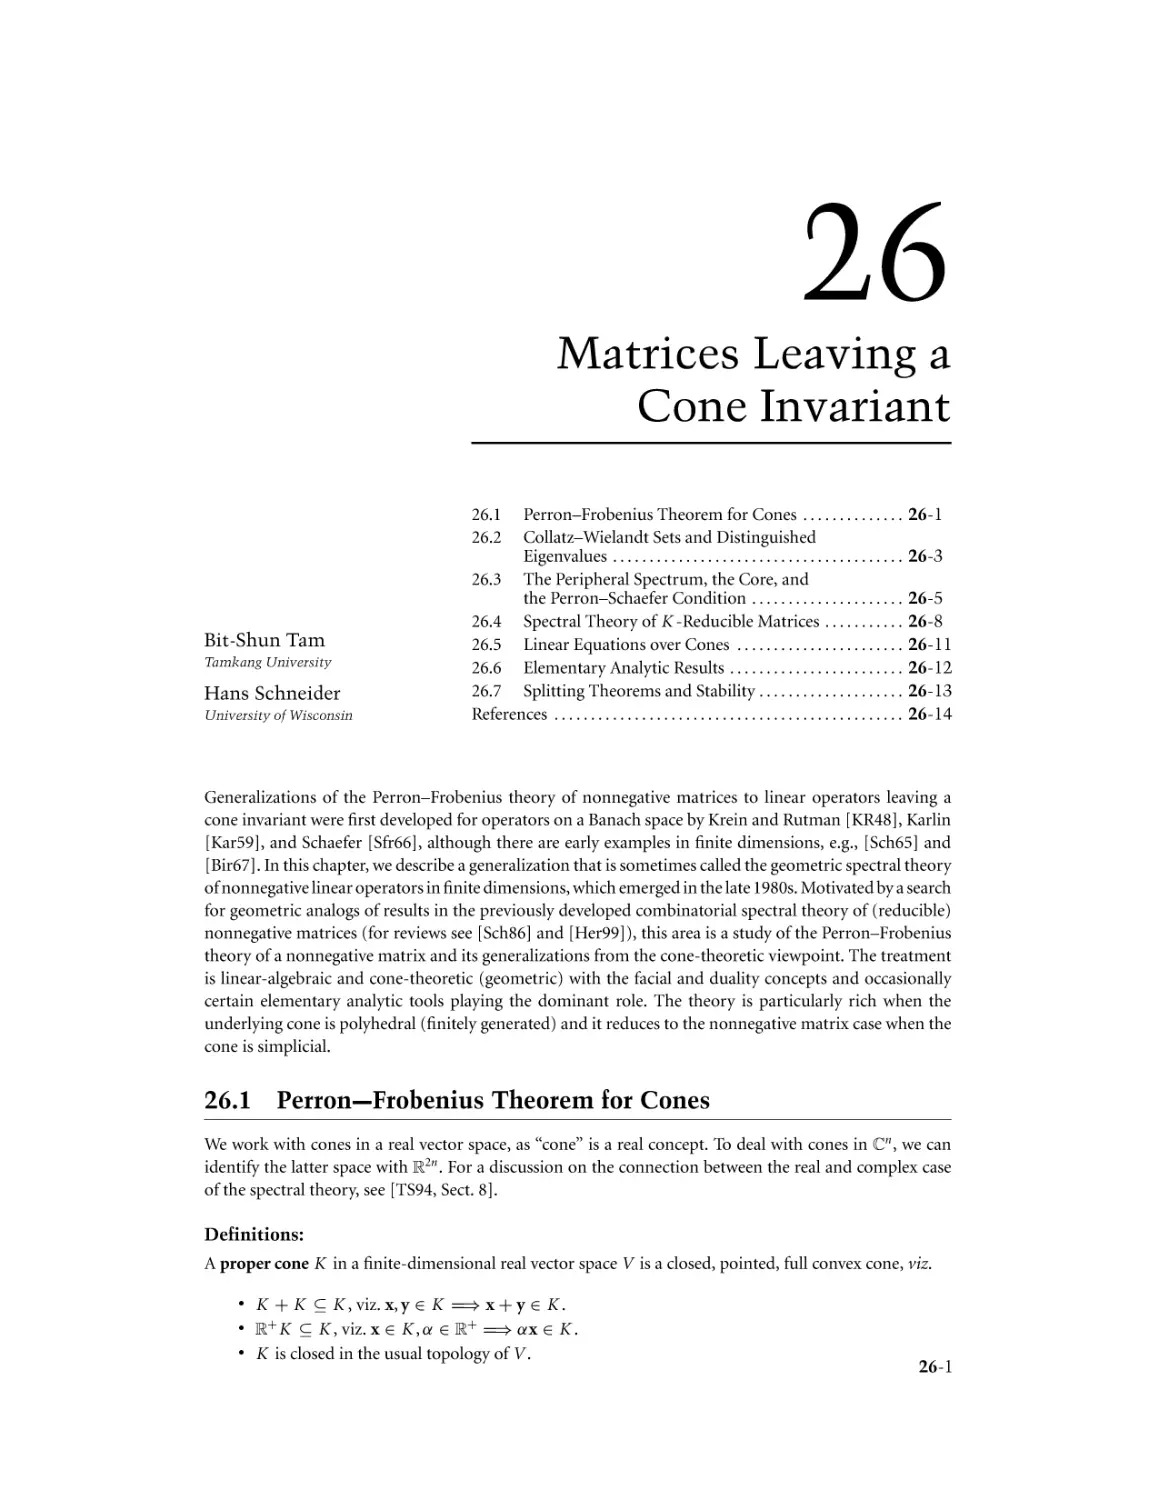 Chapter 26. Matrices Leaving a Cone Invariant